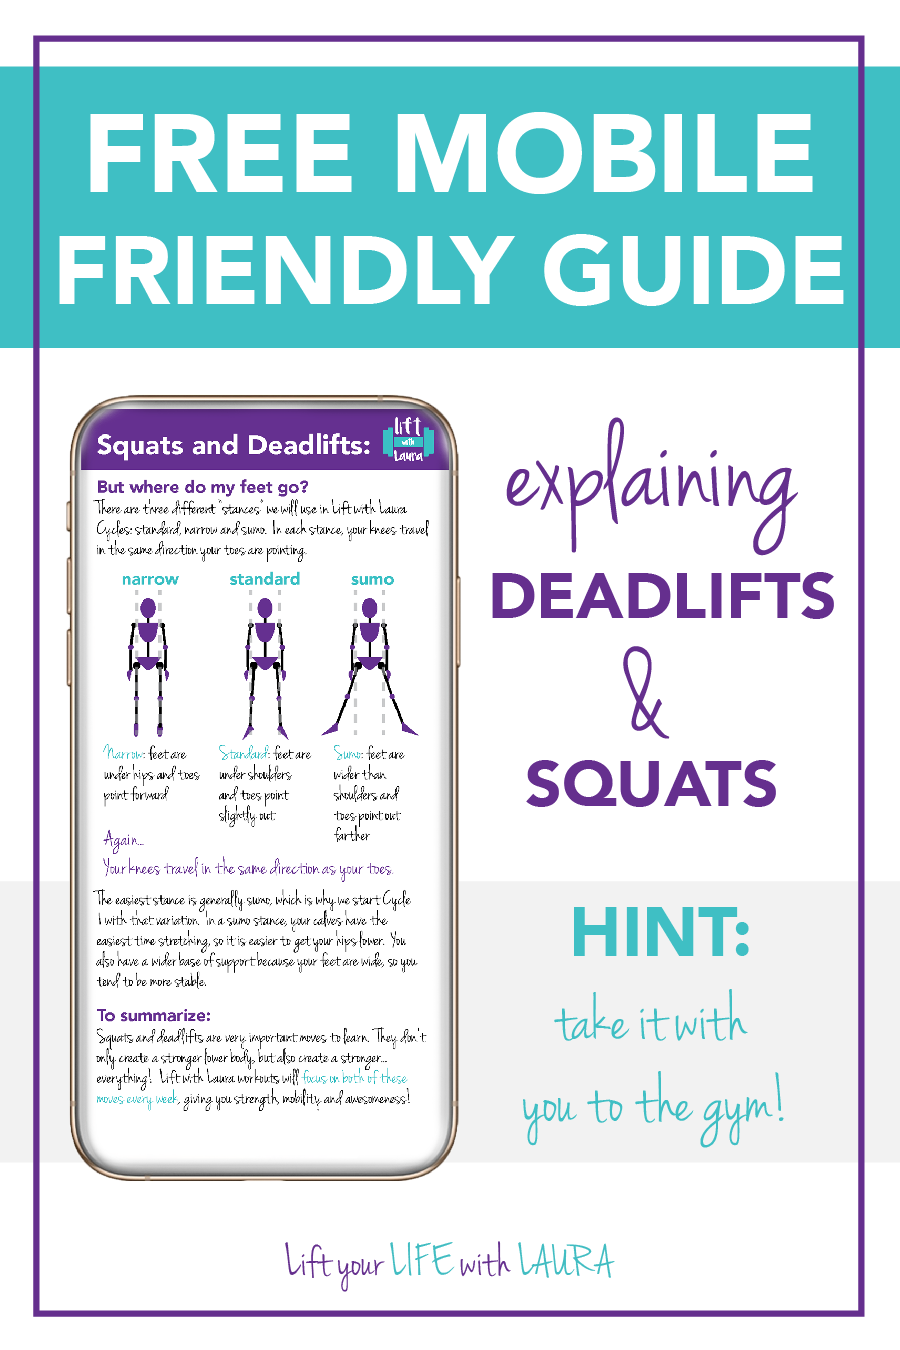 Click to download FREE guide for mastering squats and deadlifts.  Don't let these moves scare you, they are the best exercises to build muscle! #liftyourlifewithlaura #liftweights #strong #deadlift #squat #personaltrainer #trainertip